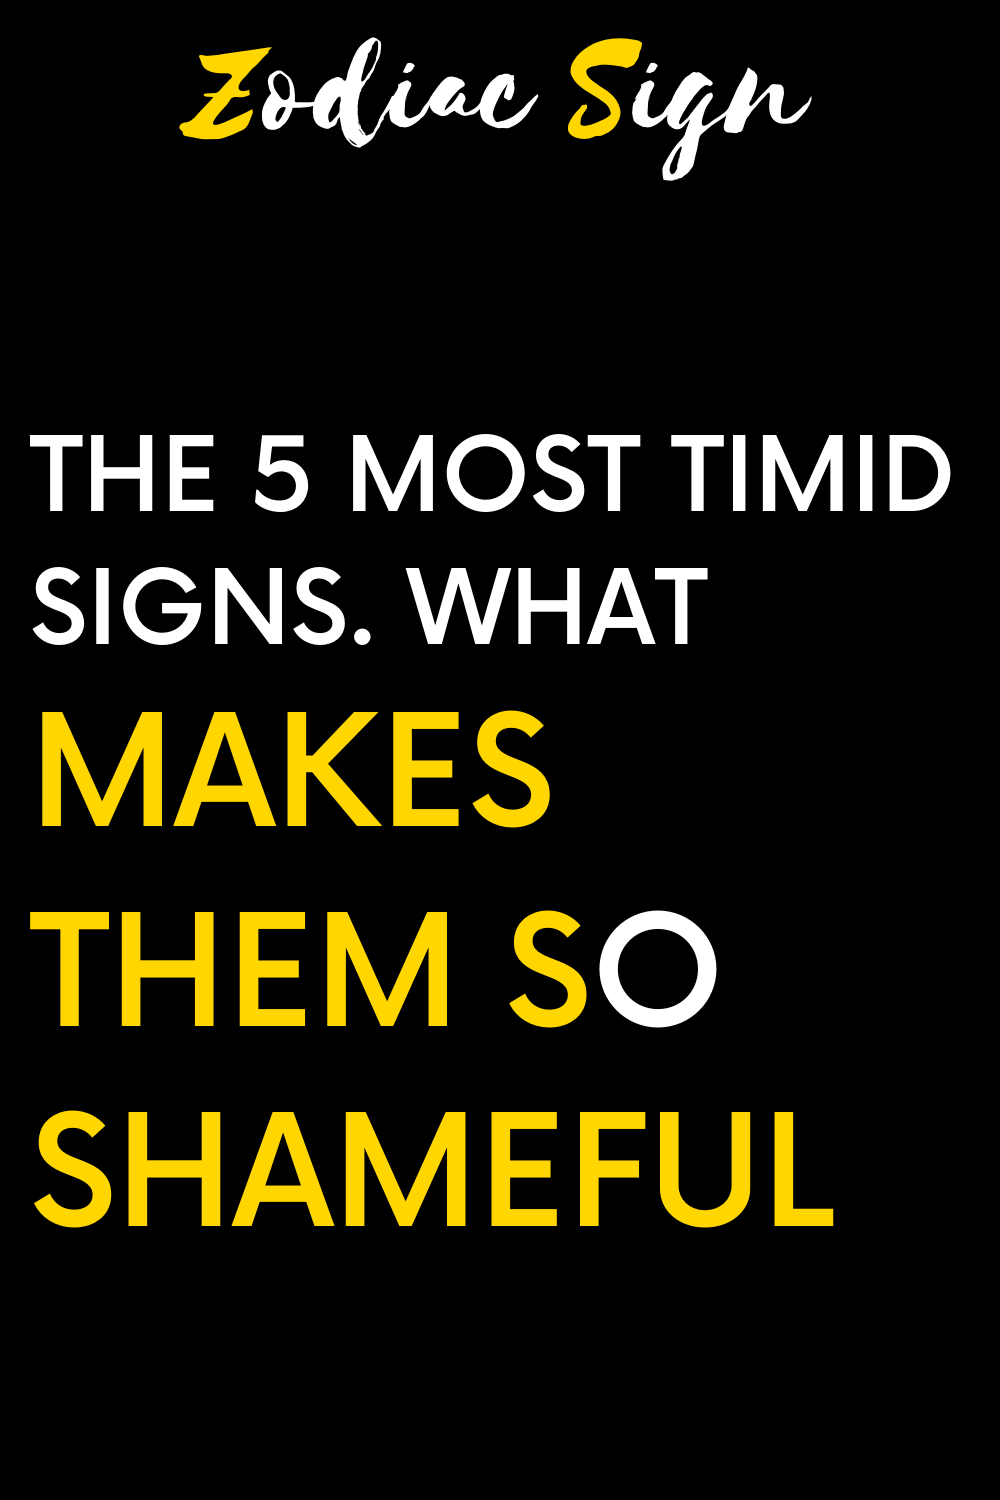 The 5 most timid signs. What makes them so shameful